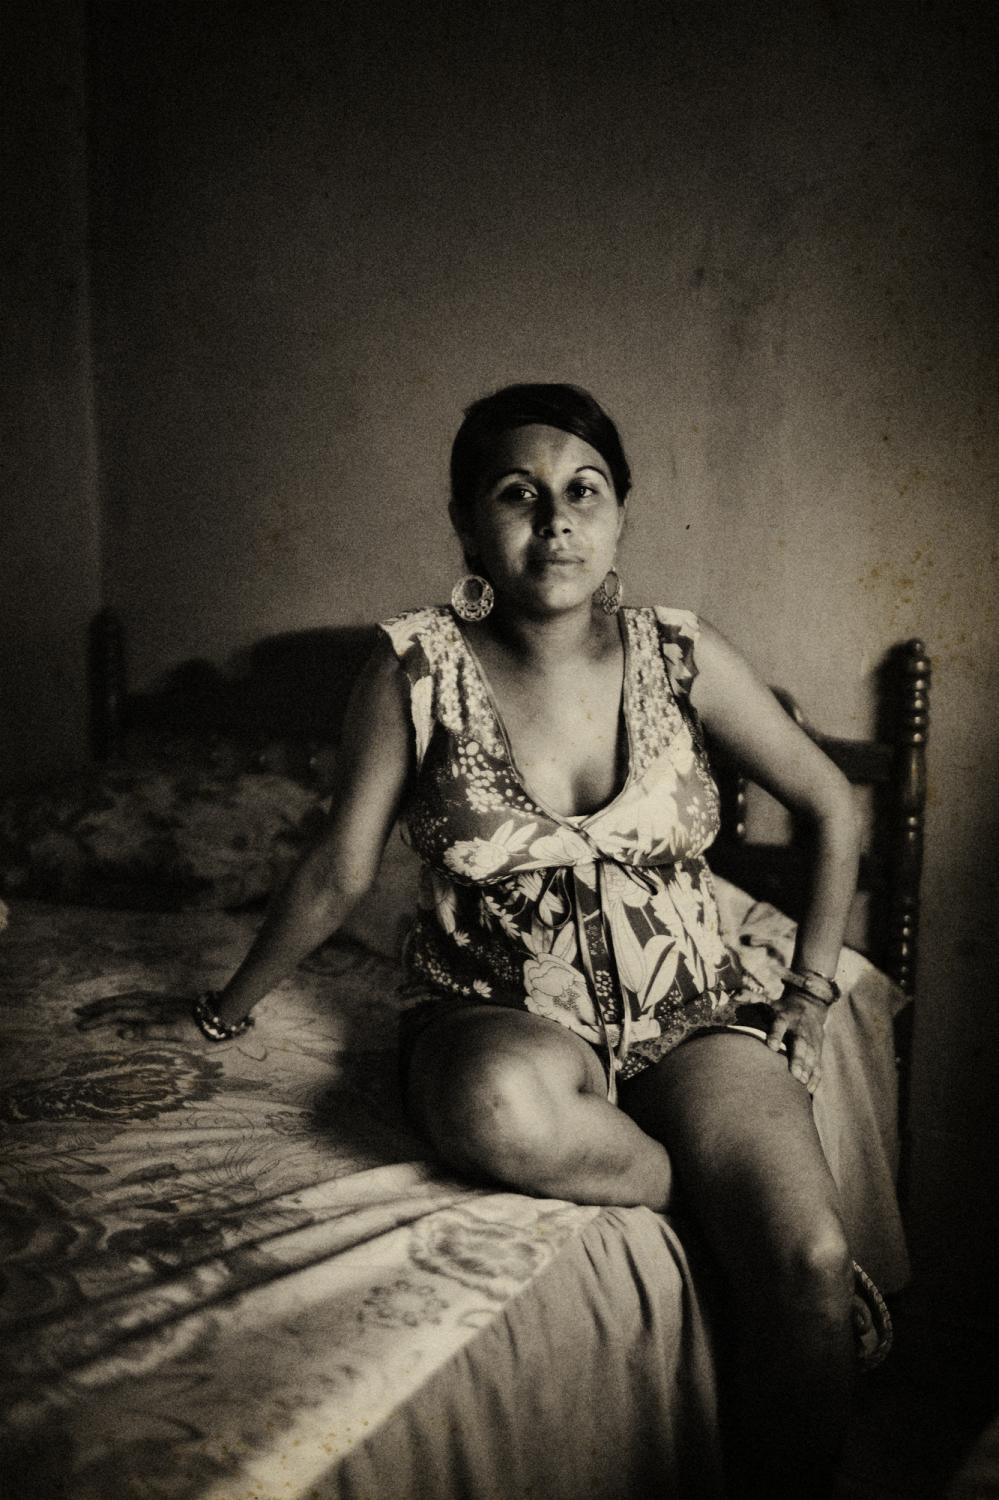 Honduras. February 2008. Choloma. Gisel Mendez is a commercial sex worker, she is HIV positive and seven months pregnant.